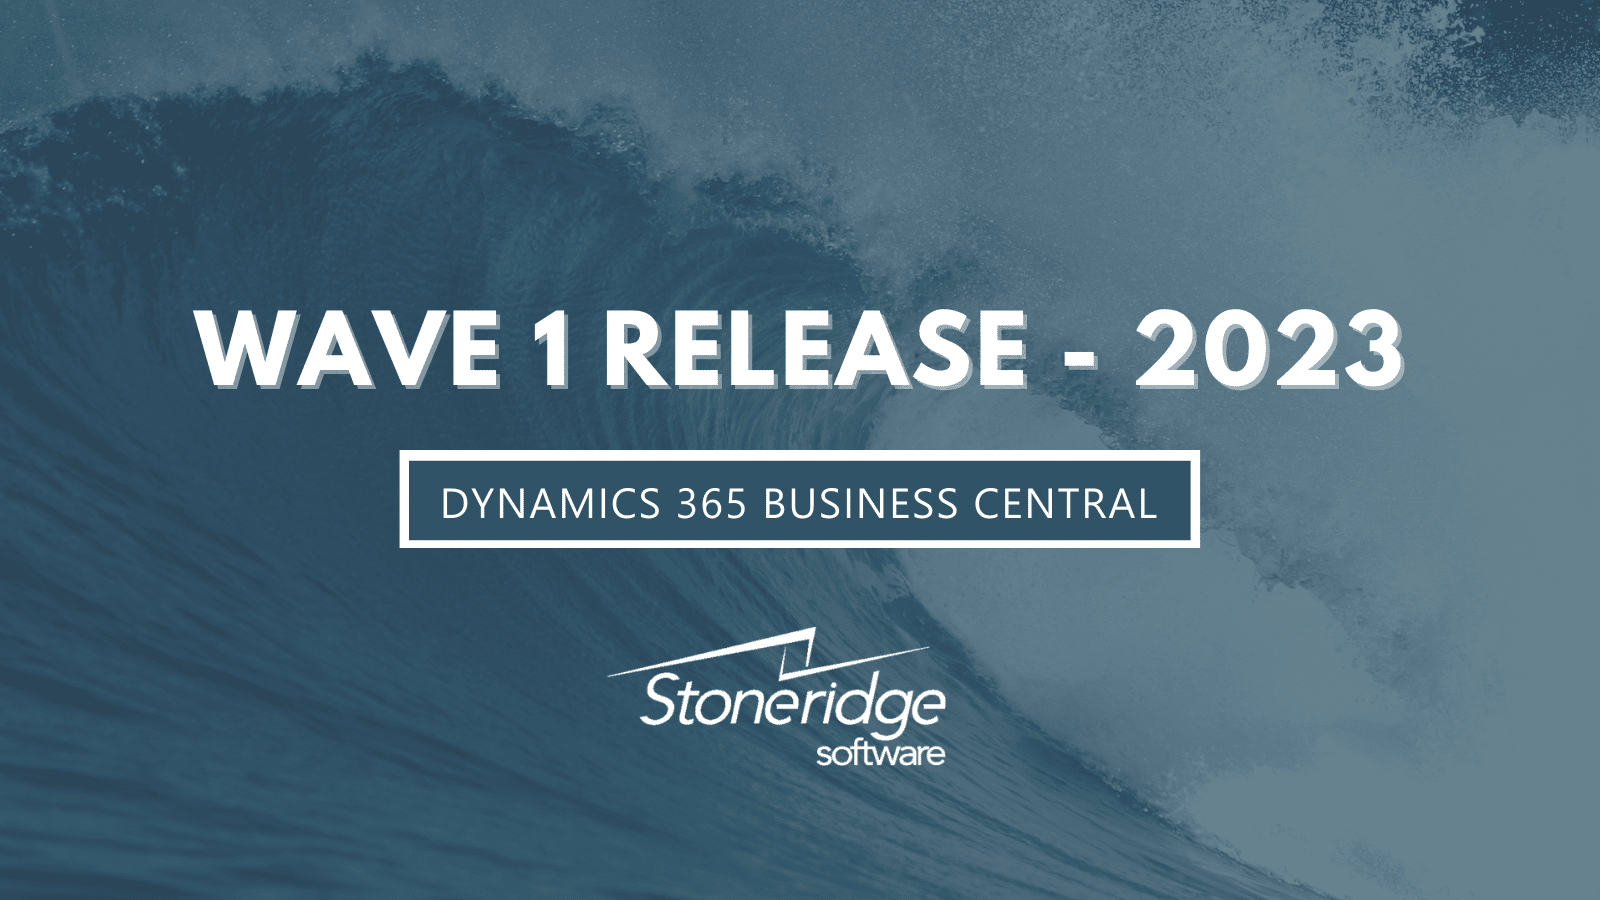 Dynamics 365 Business Central Wave 1 2023 Release